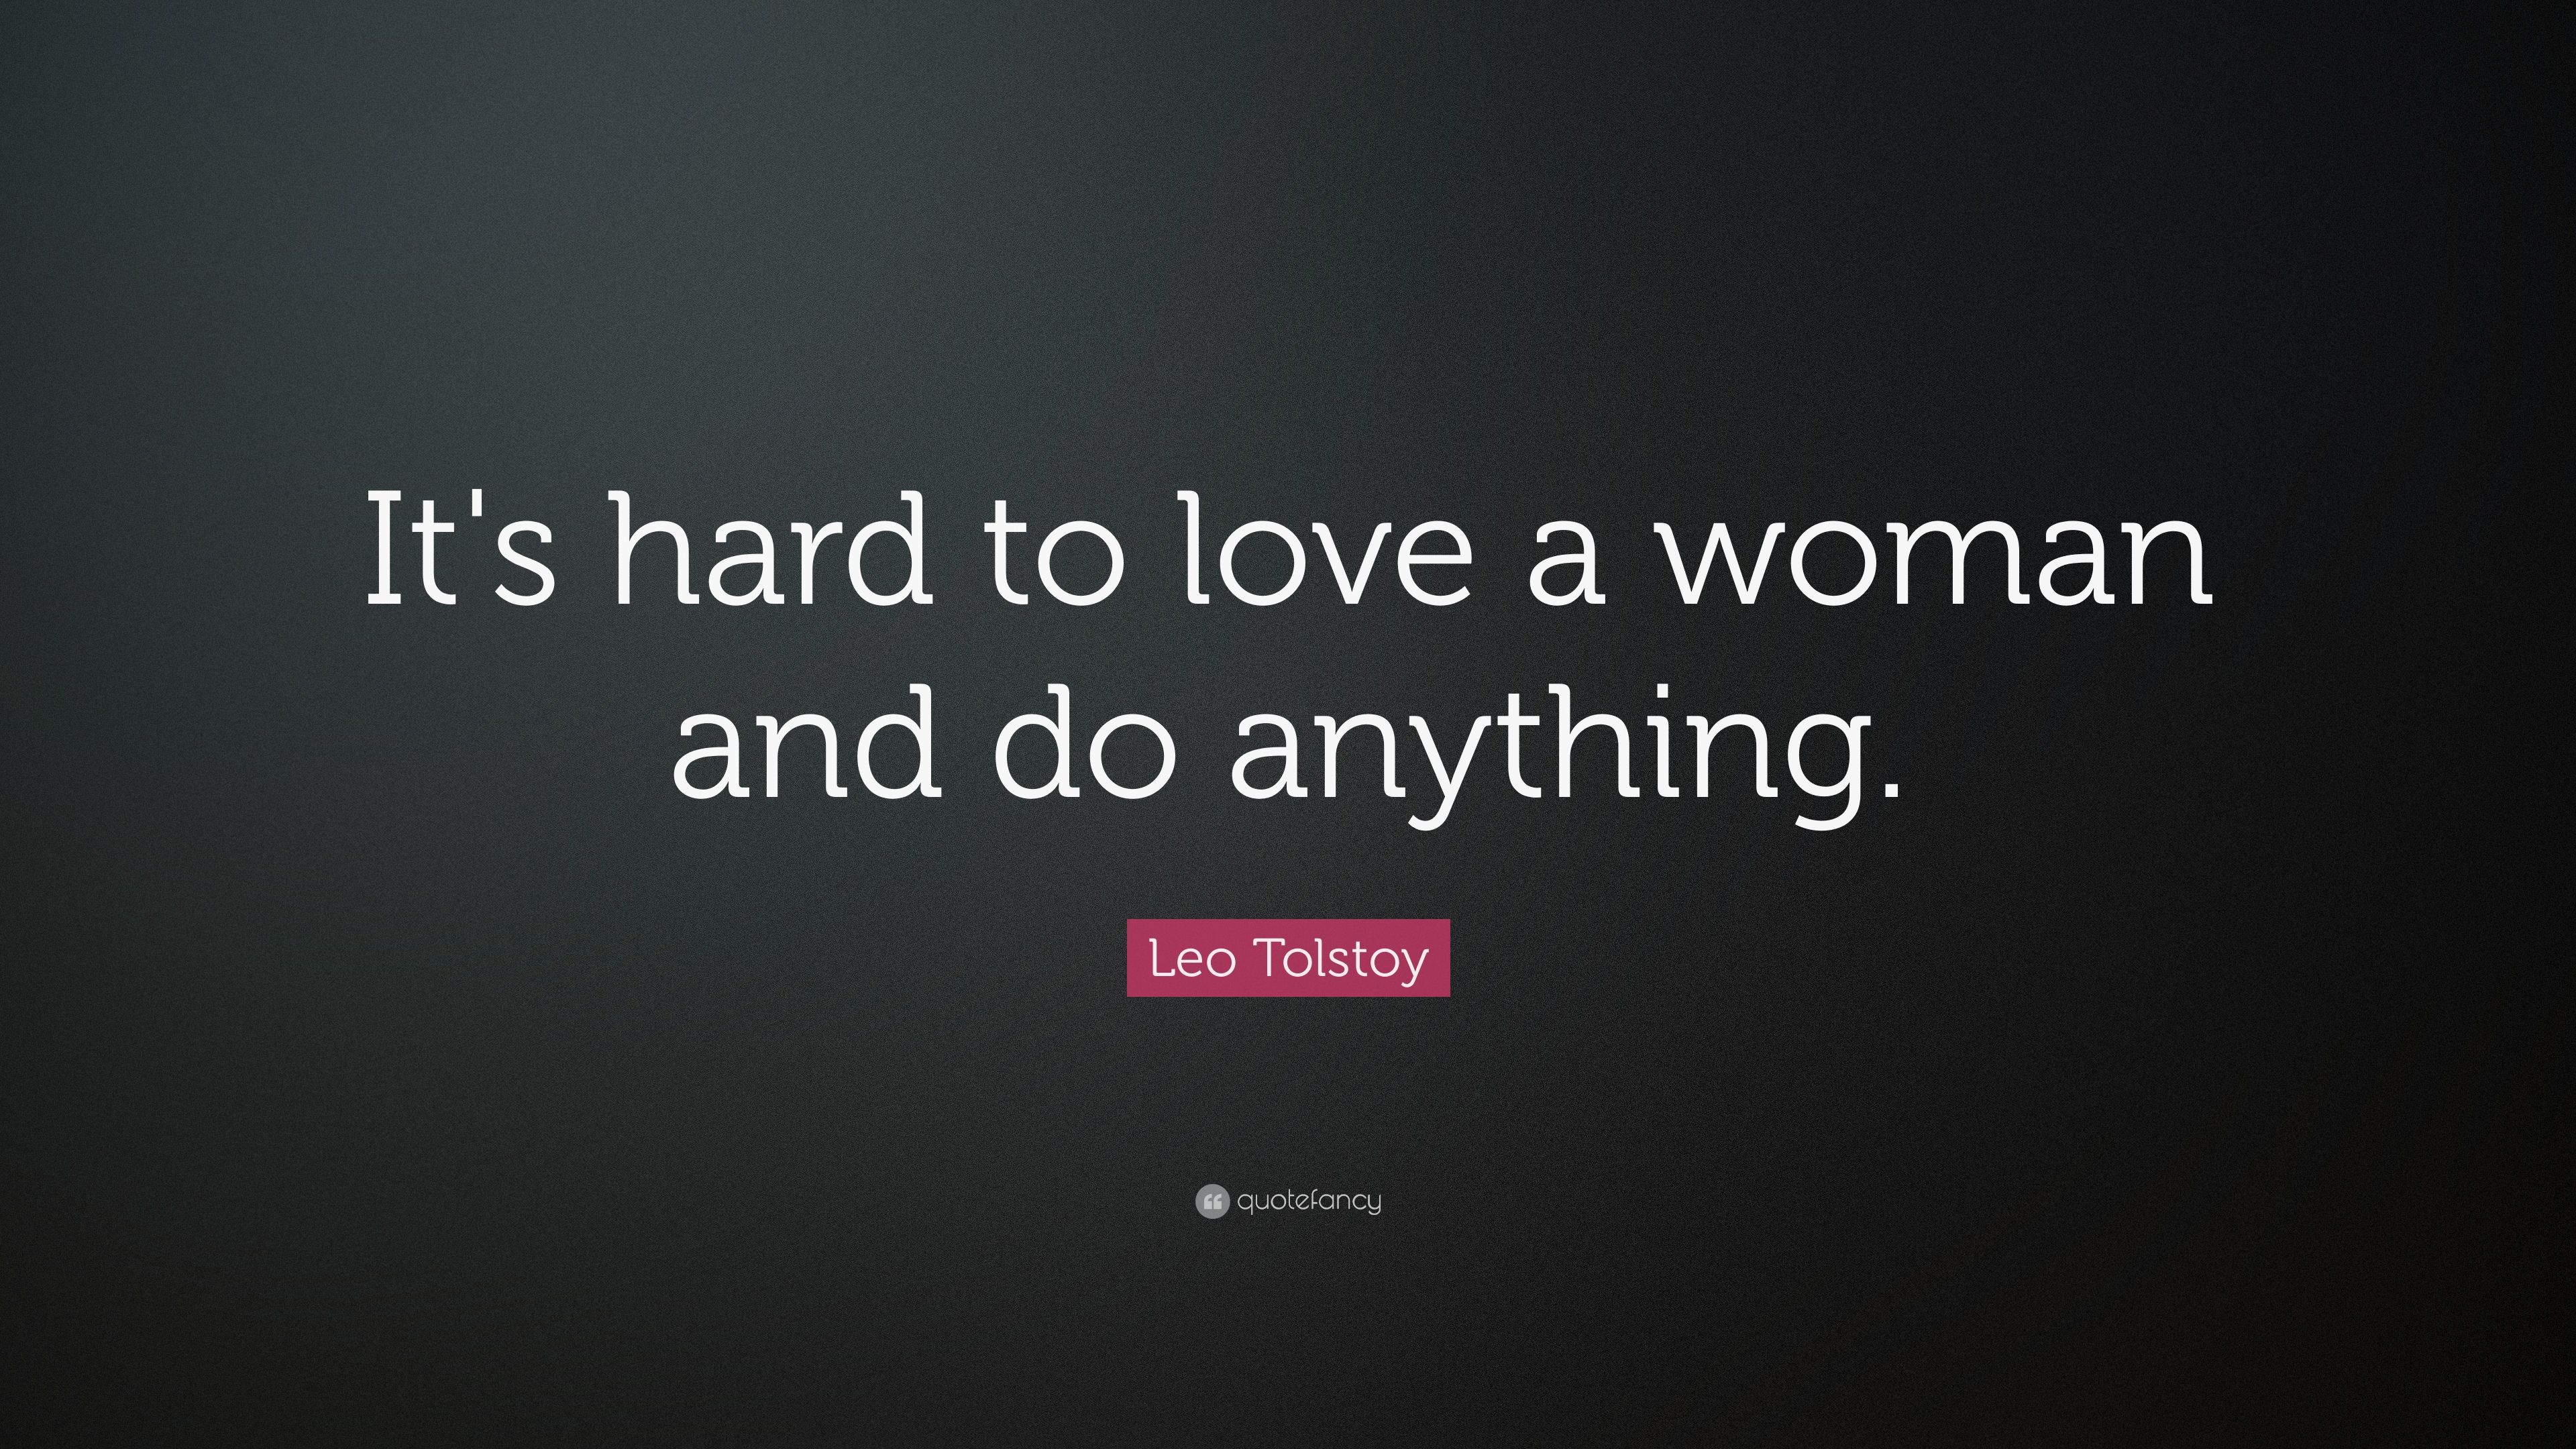 Leo Tolstoy Quote: “It's hard to love a woman and do anything.” (14 wallpaper)